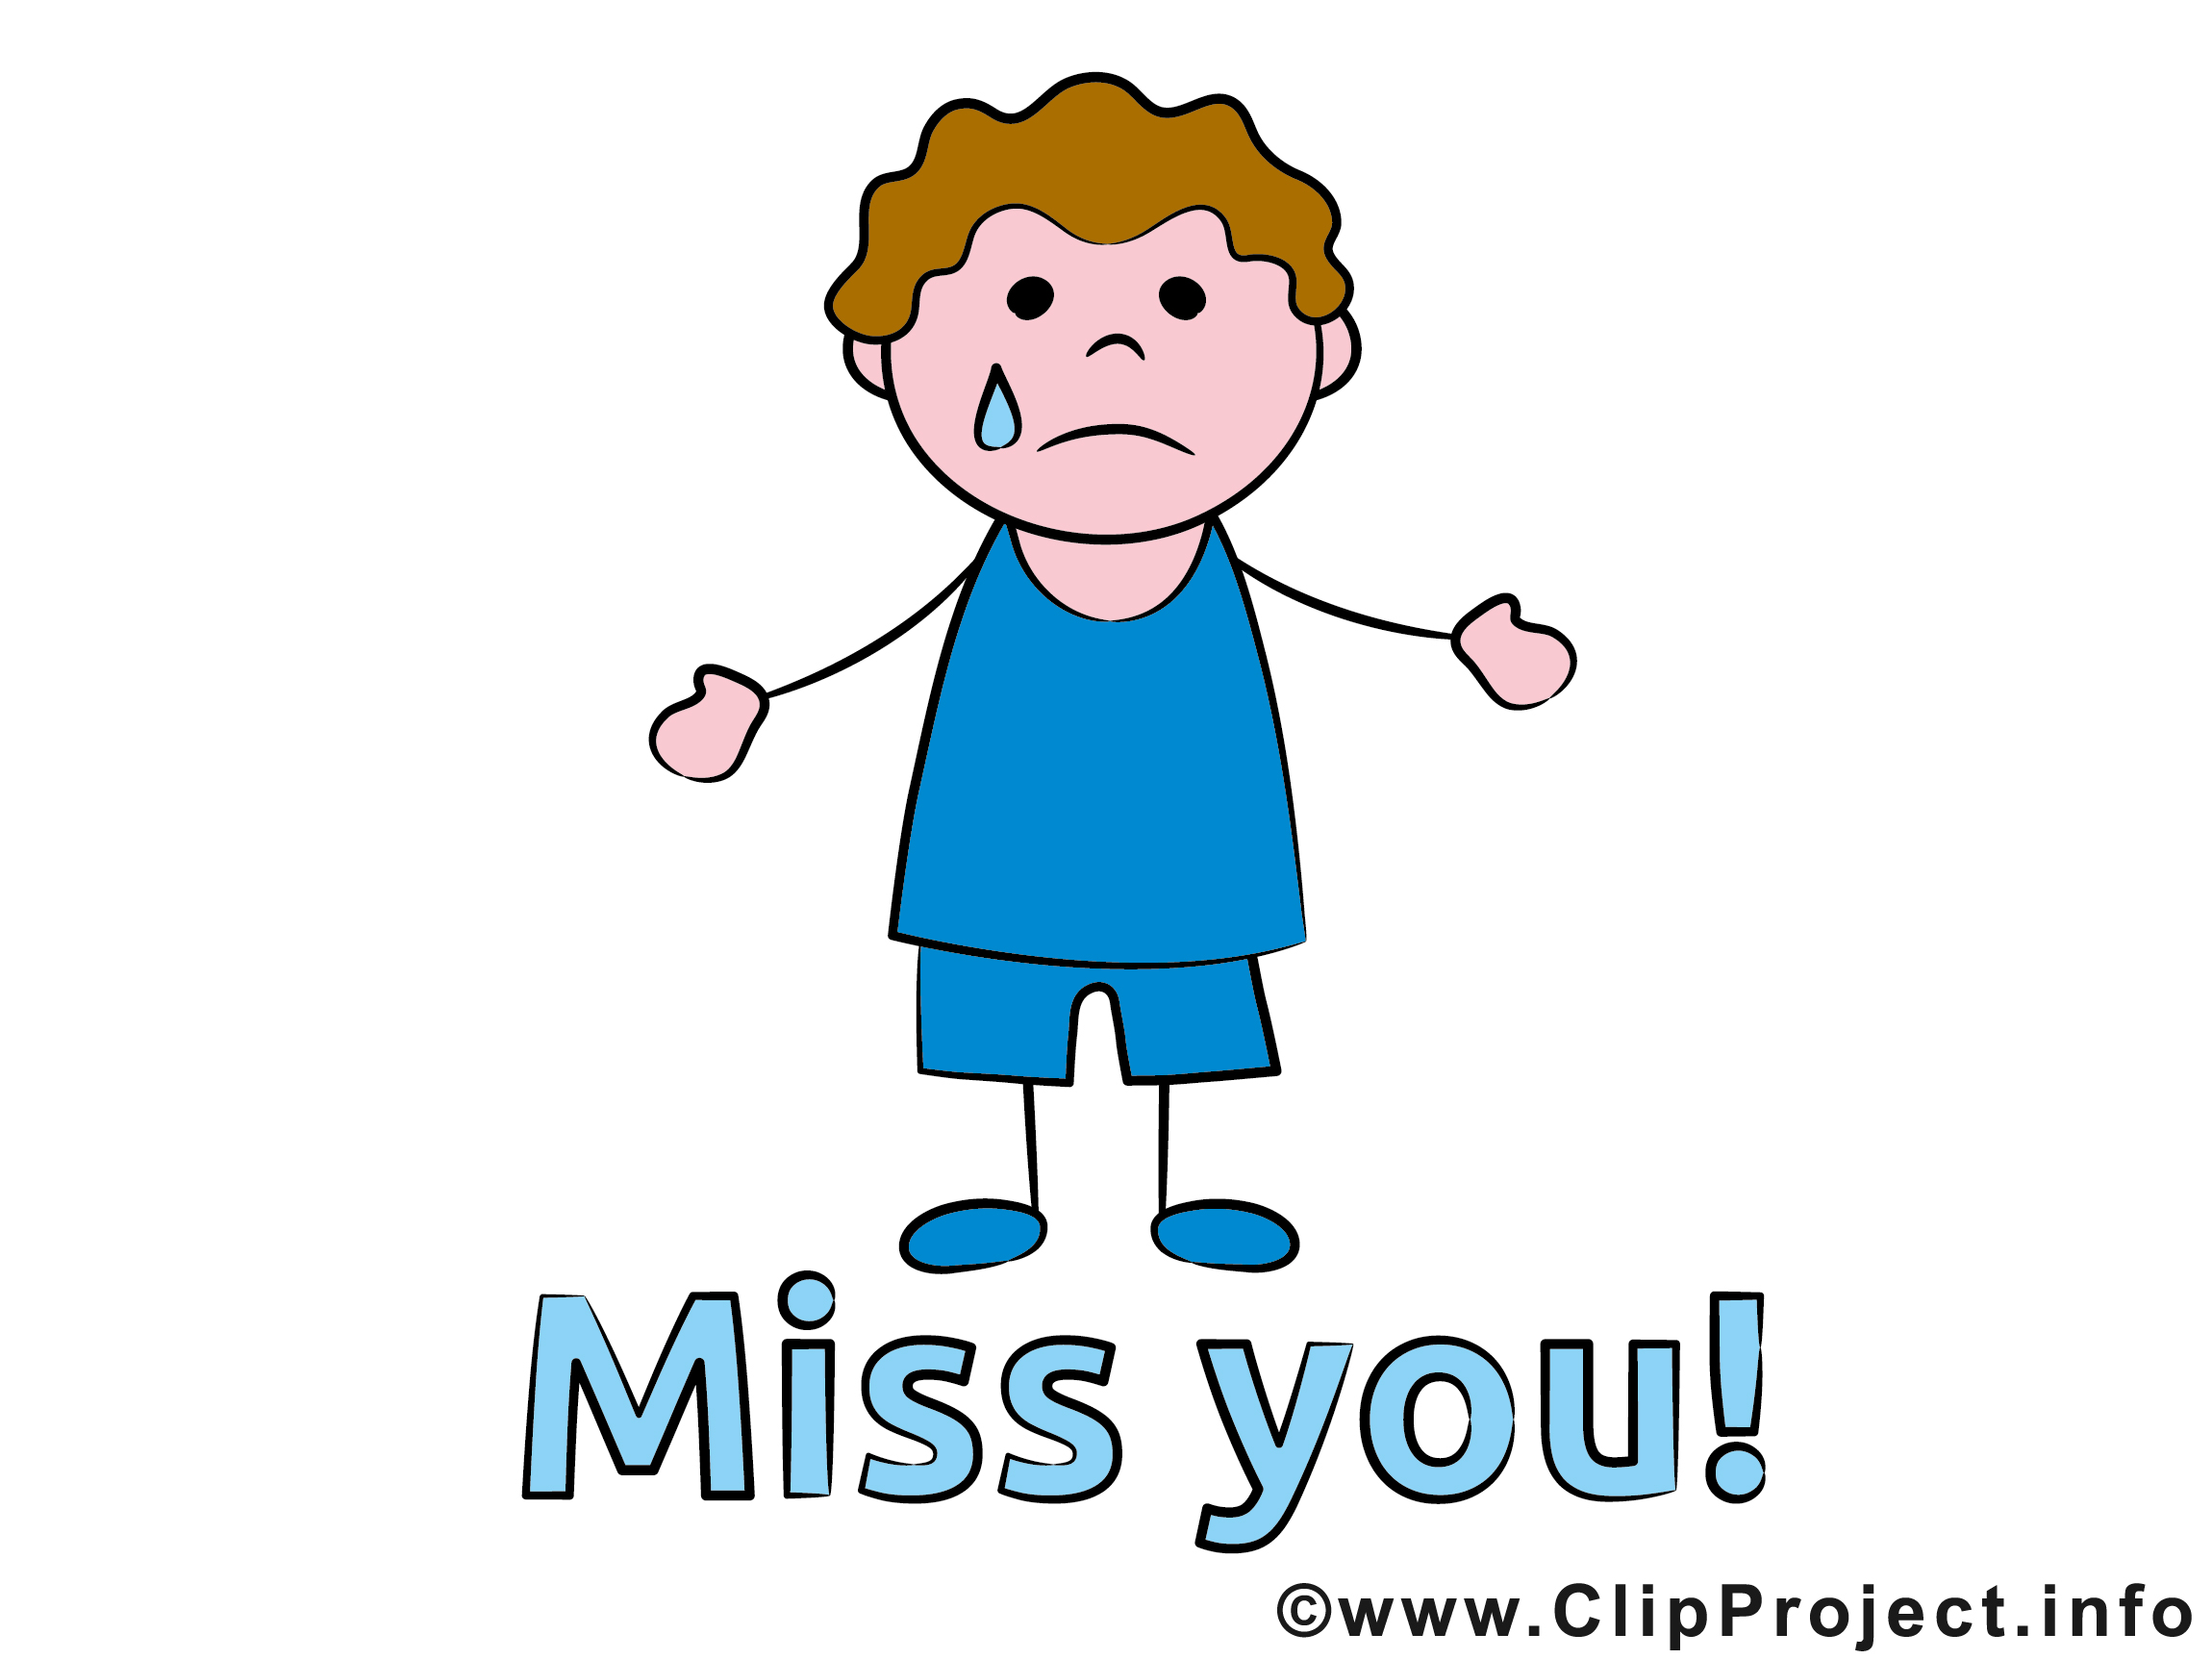 10+ Miss You Clip Art - Preview : Preview Clipart HDClipartA